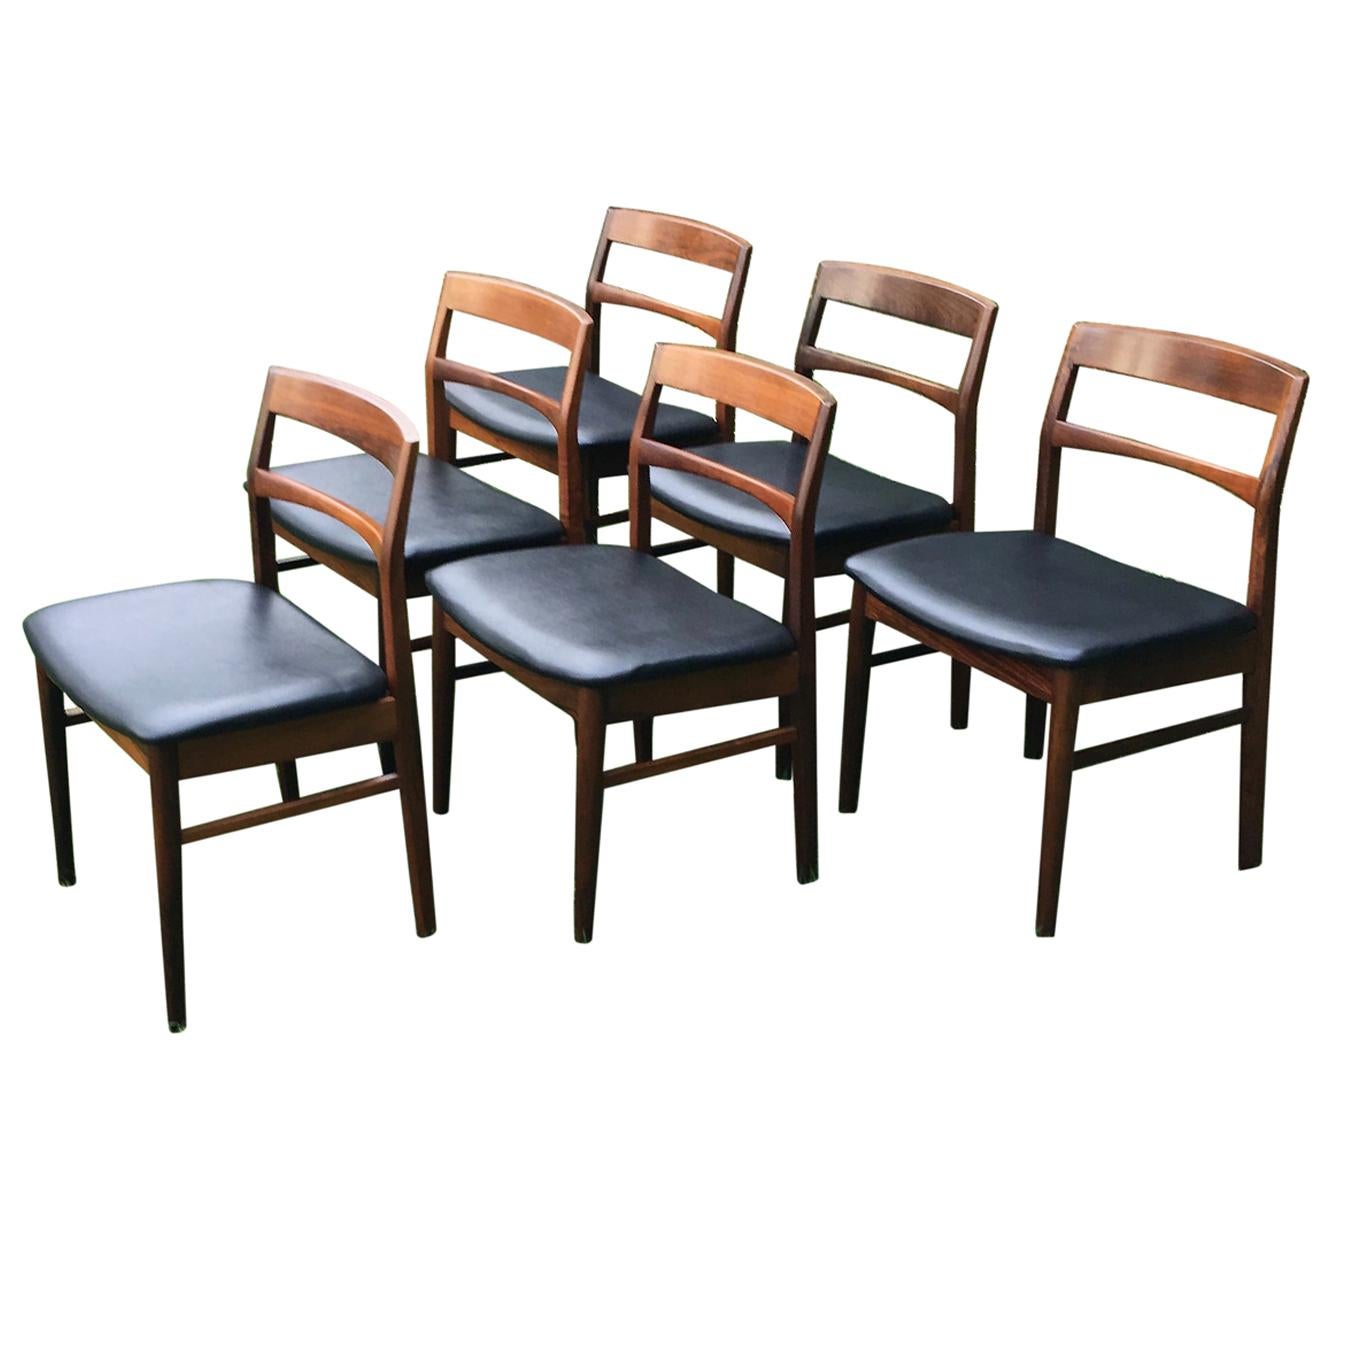 Set of 6 Mid Century Danish Rosewood Dining Chairs by Henning Kjaernulf, 1960s For Sale